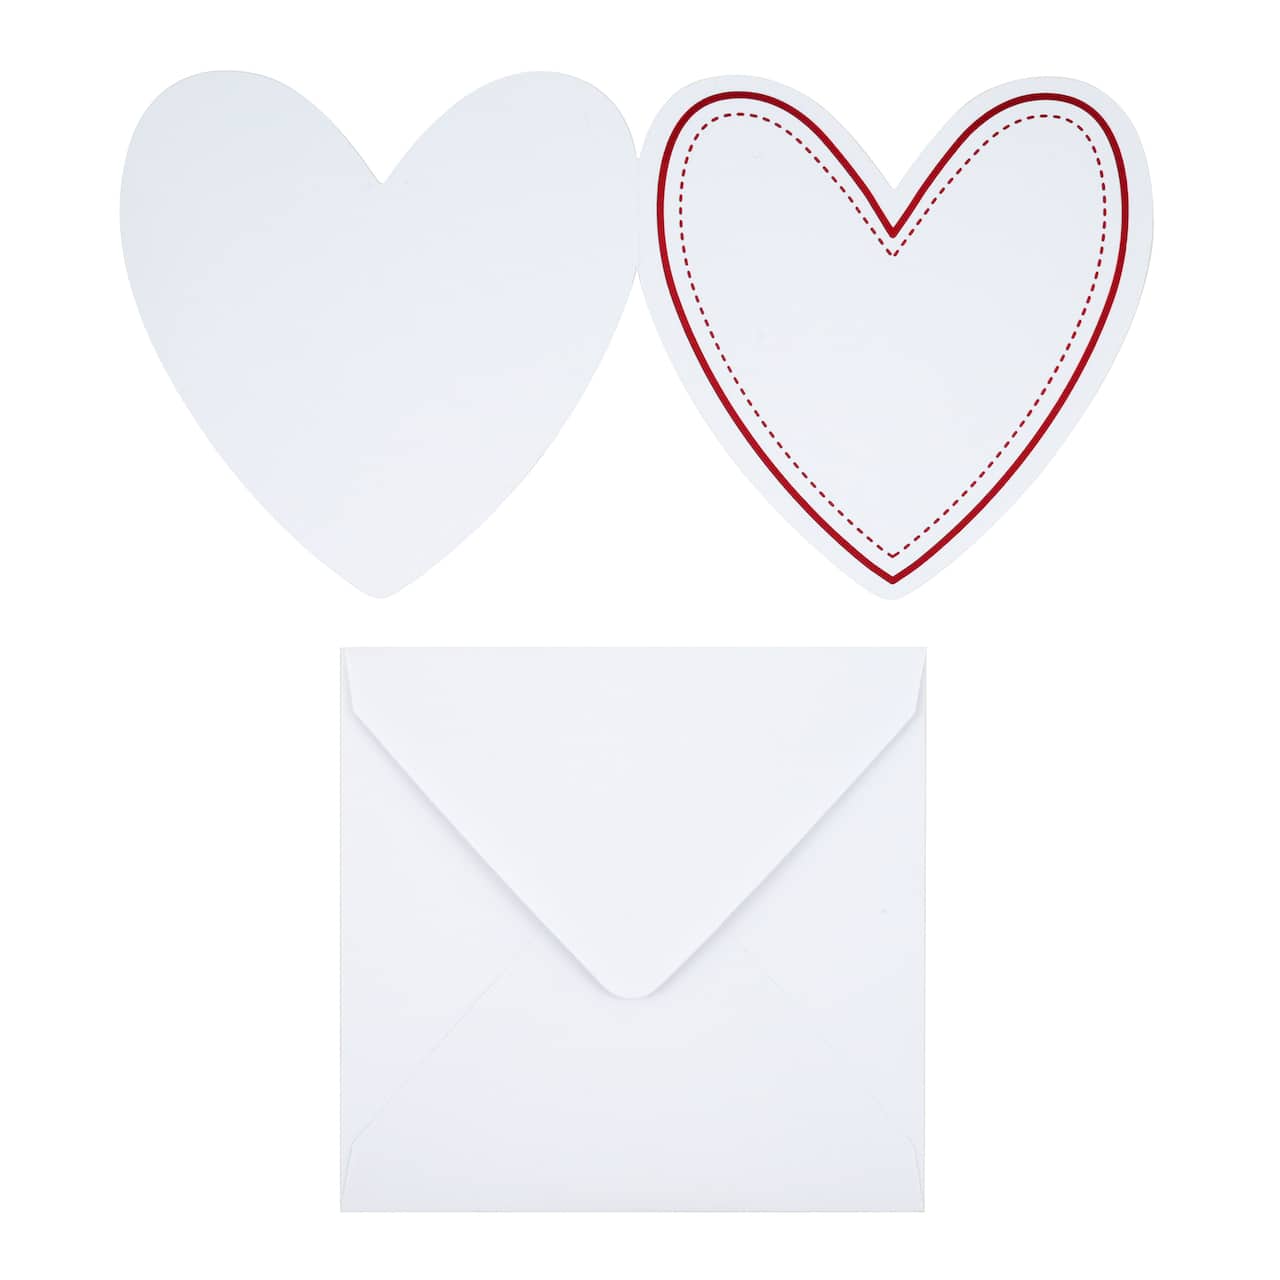 3.8 x 4 Stitched Heart Cards & Envelopes by Recollections™, 24ct.